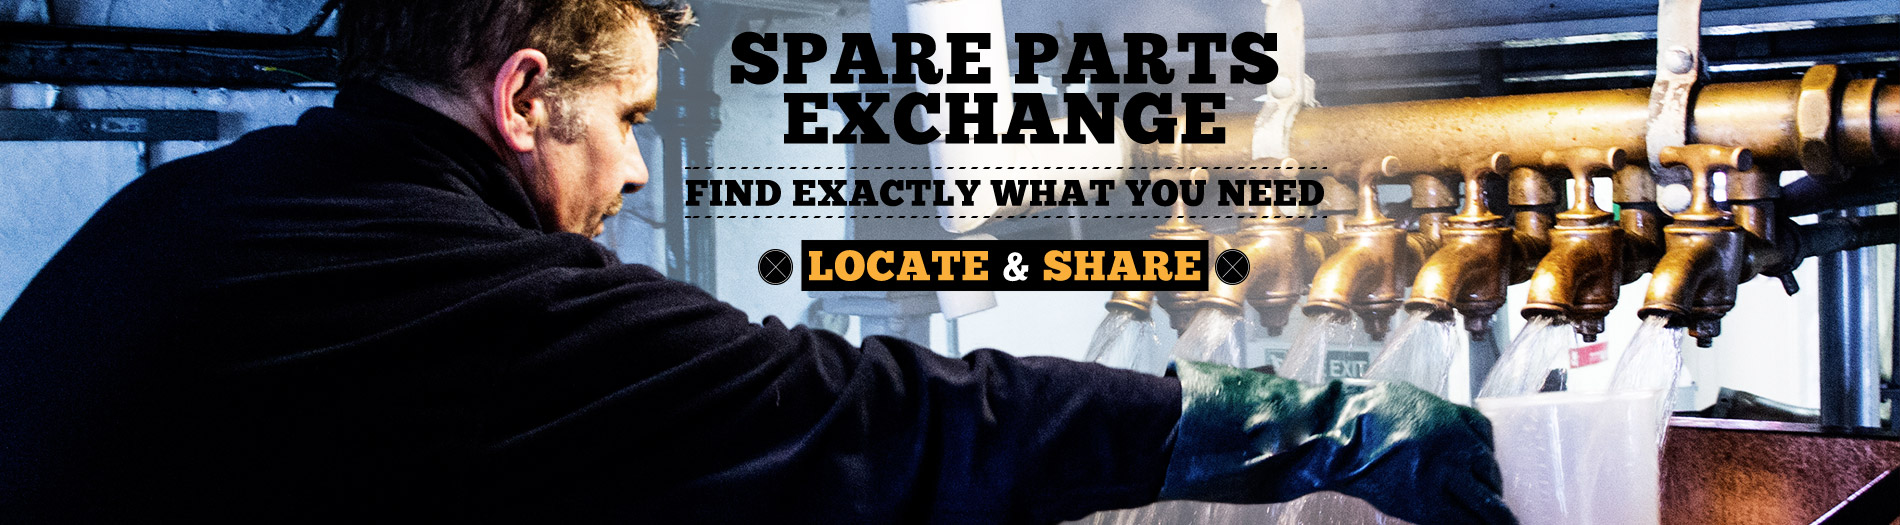 Spare Parts Exchange - Find Exactly What You Need  Locate and share